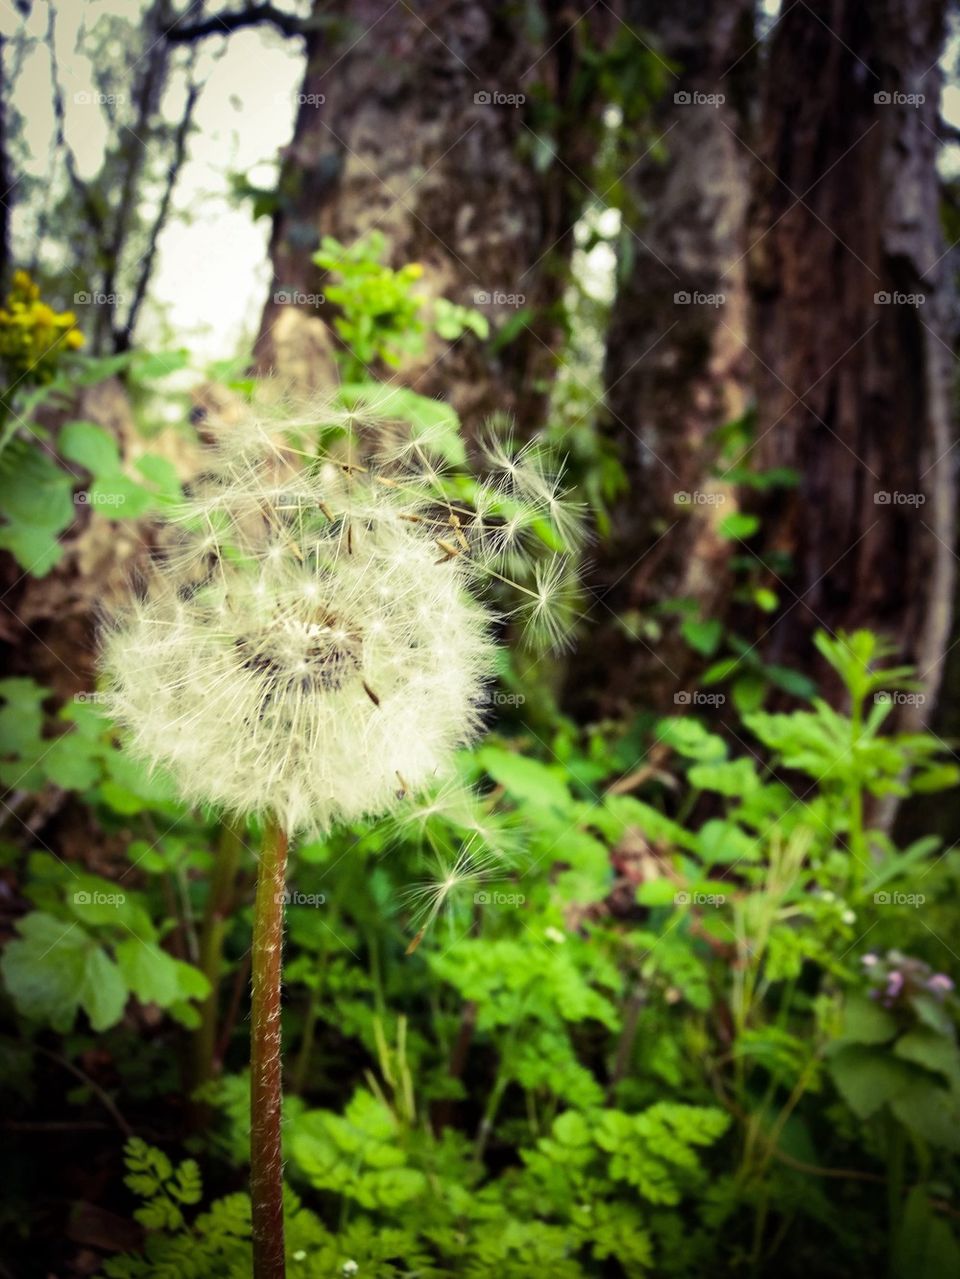 Dandelion about to blow